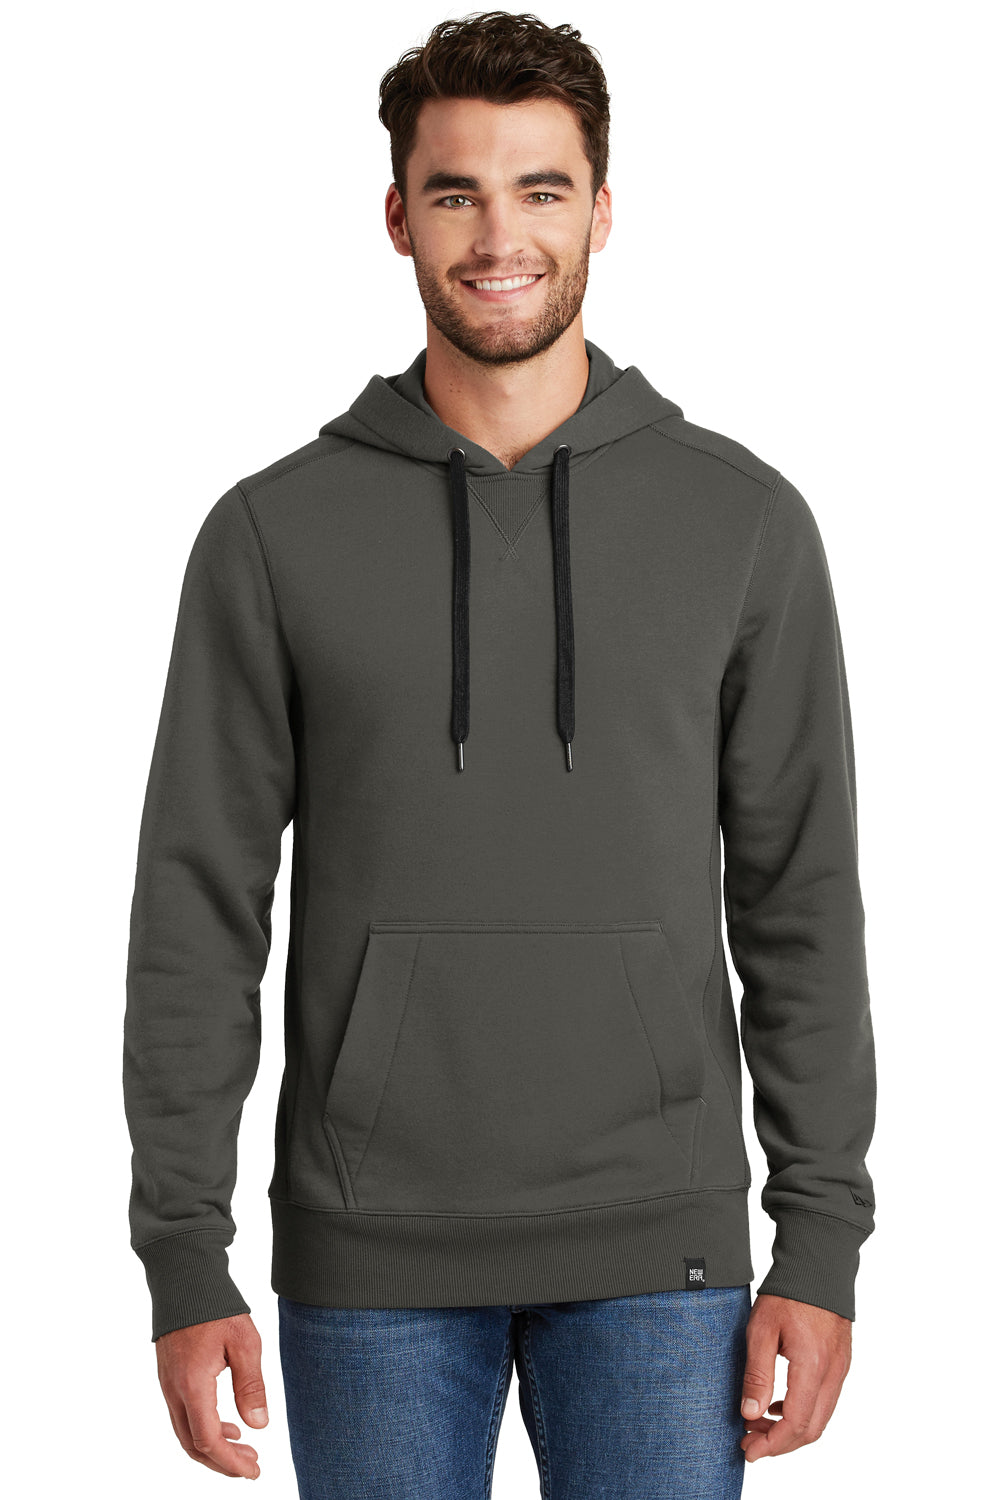 New Era NEA500 Mens Sueded French Terry Hooded Sweatshirt Hoodie Graphite Grey Front